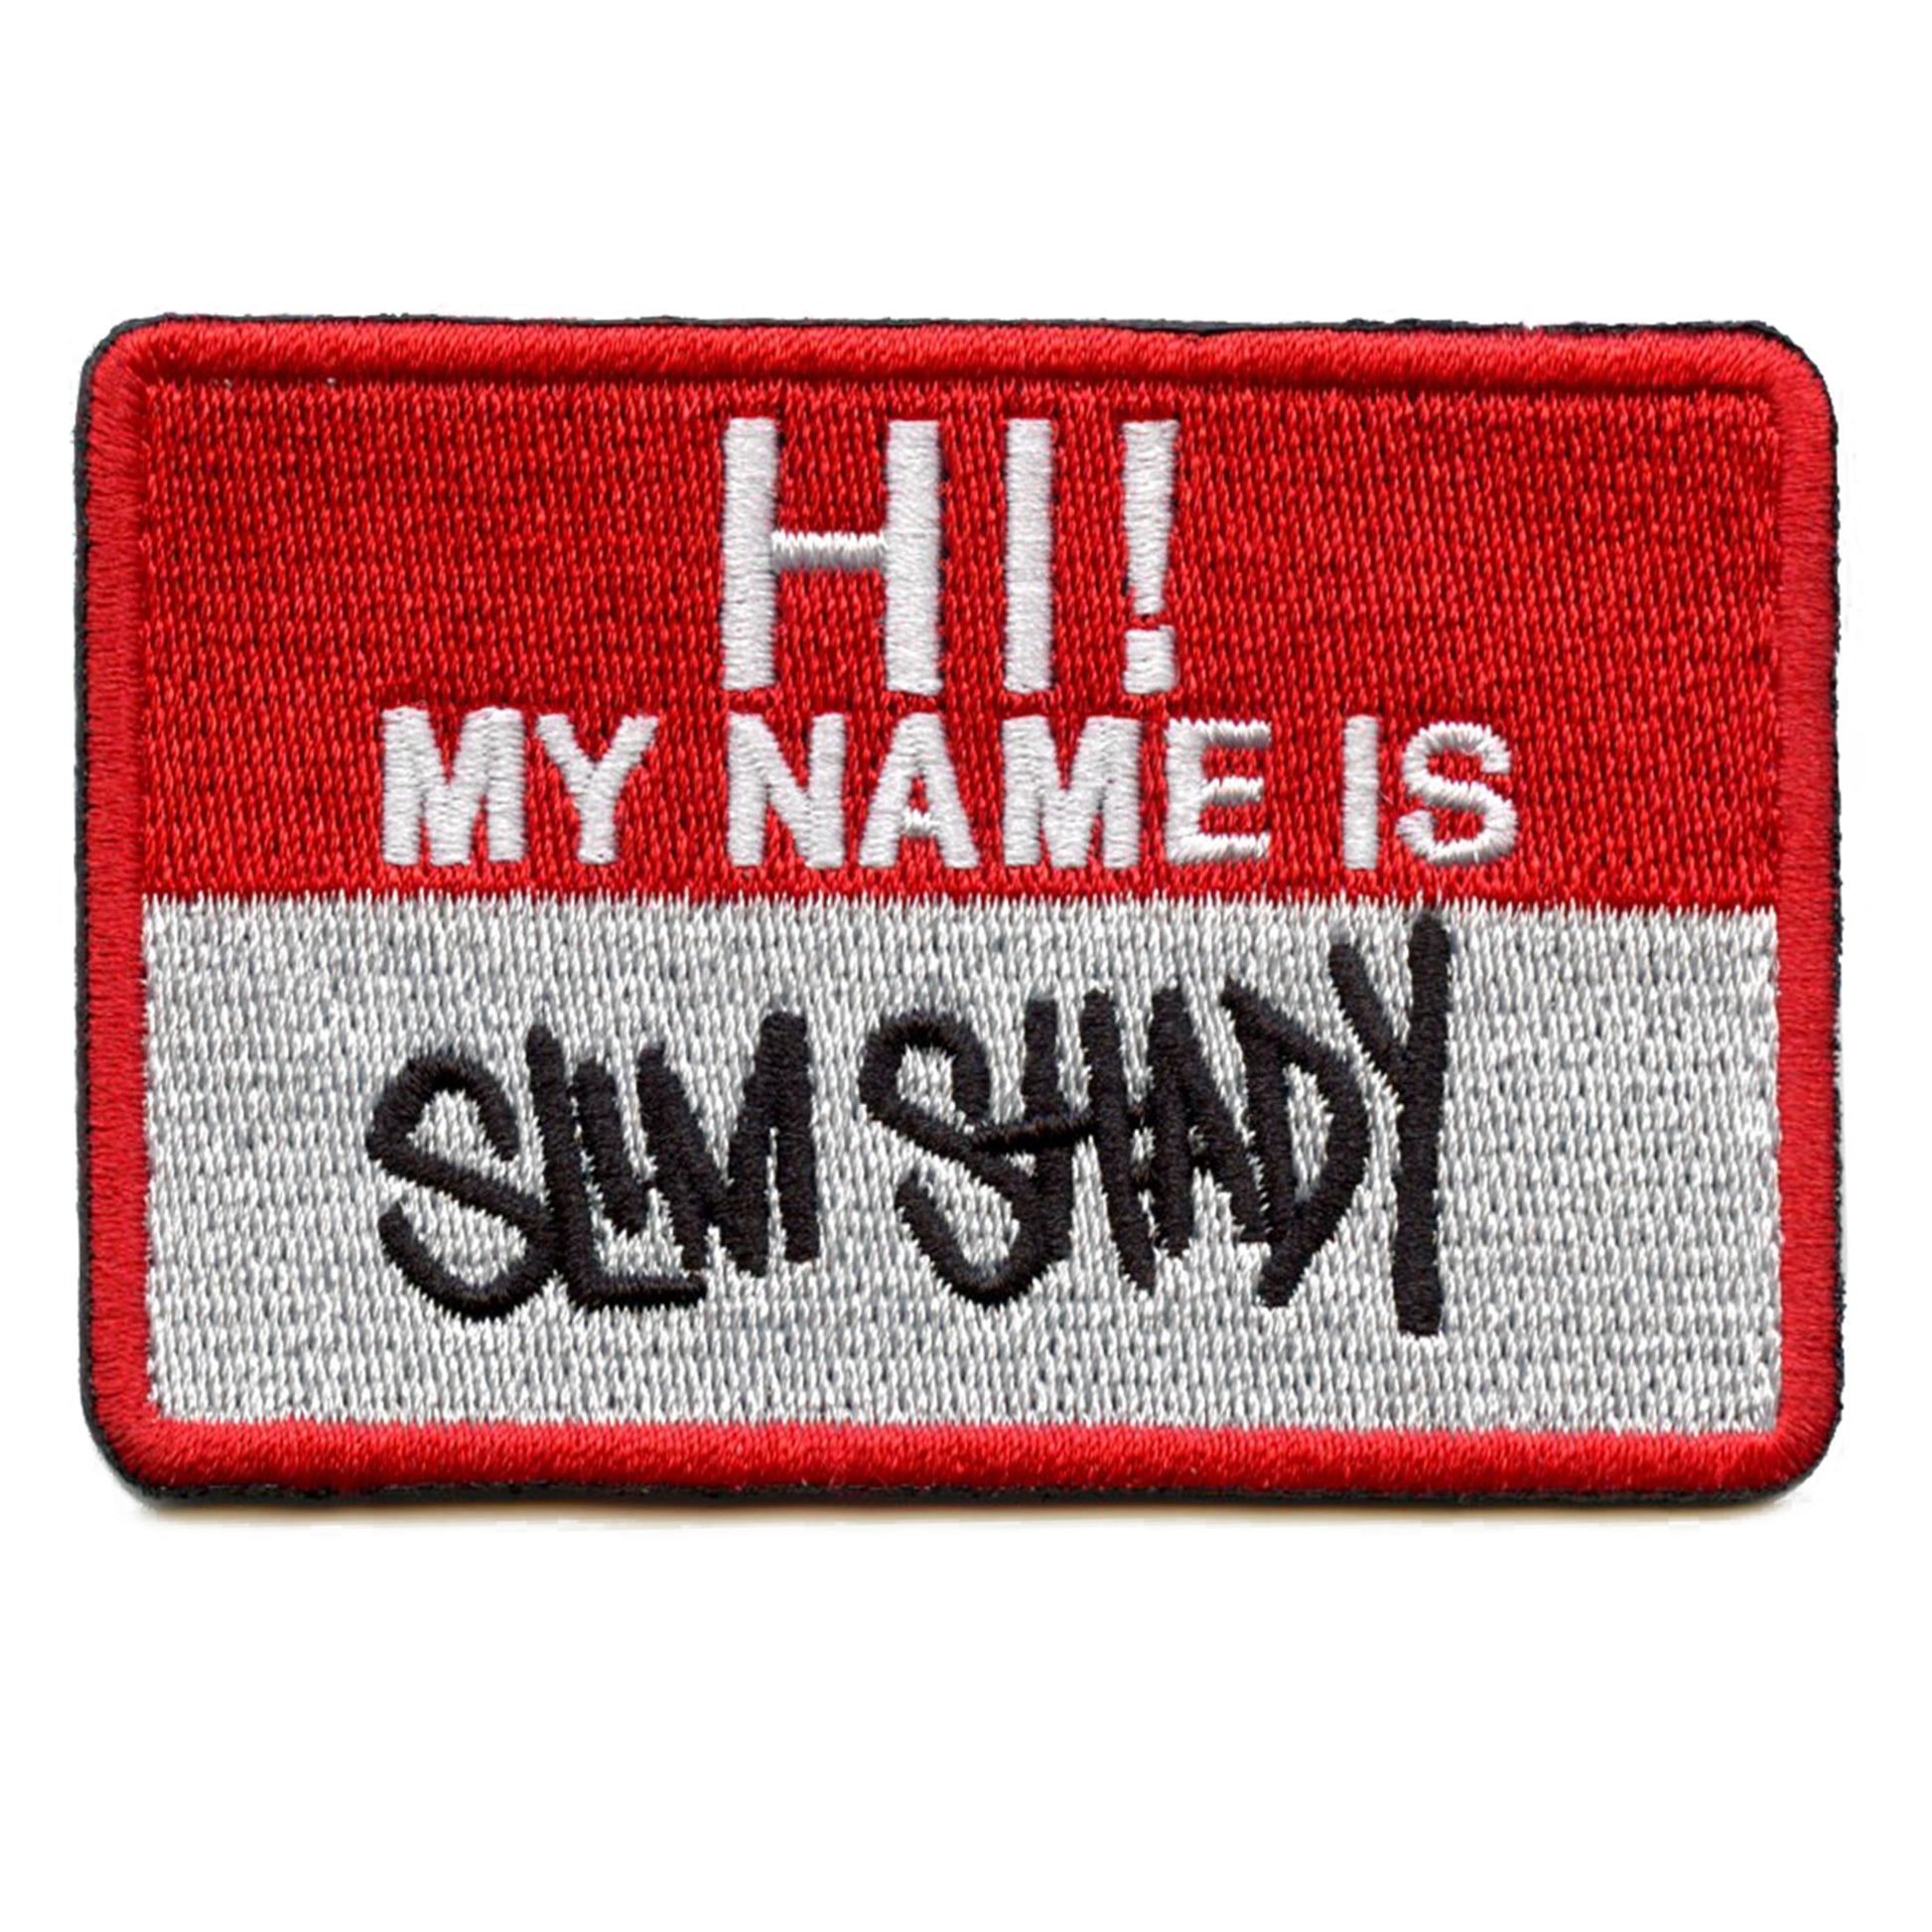 Eminem Hi My Name Is Slim Shady Name Badge Patch Rapper – Patch